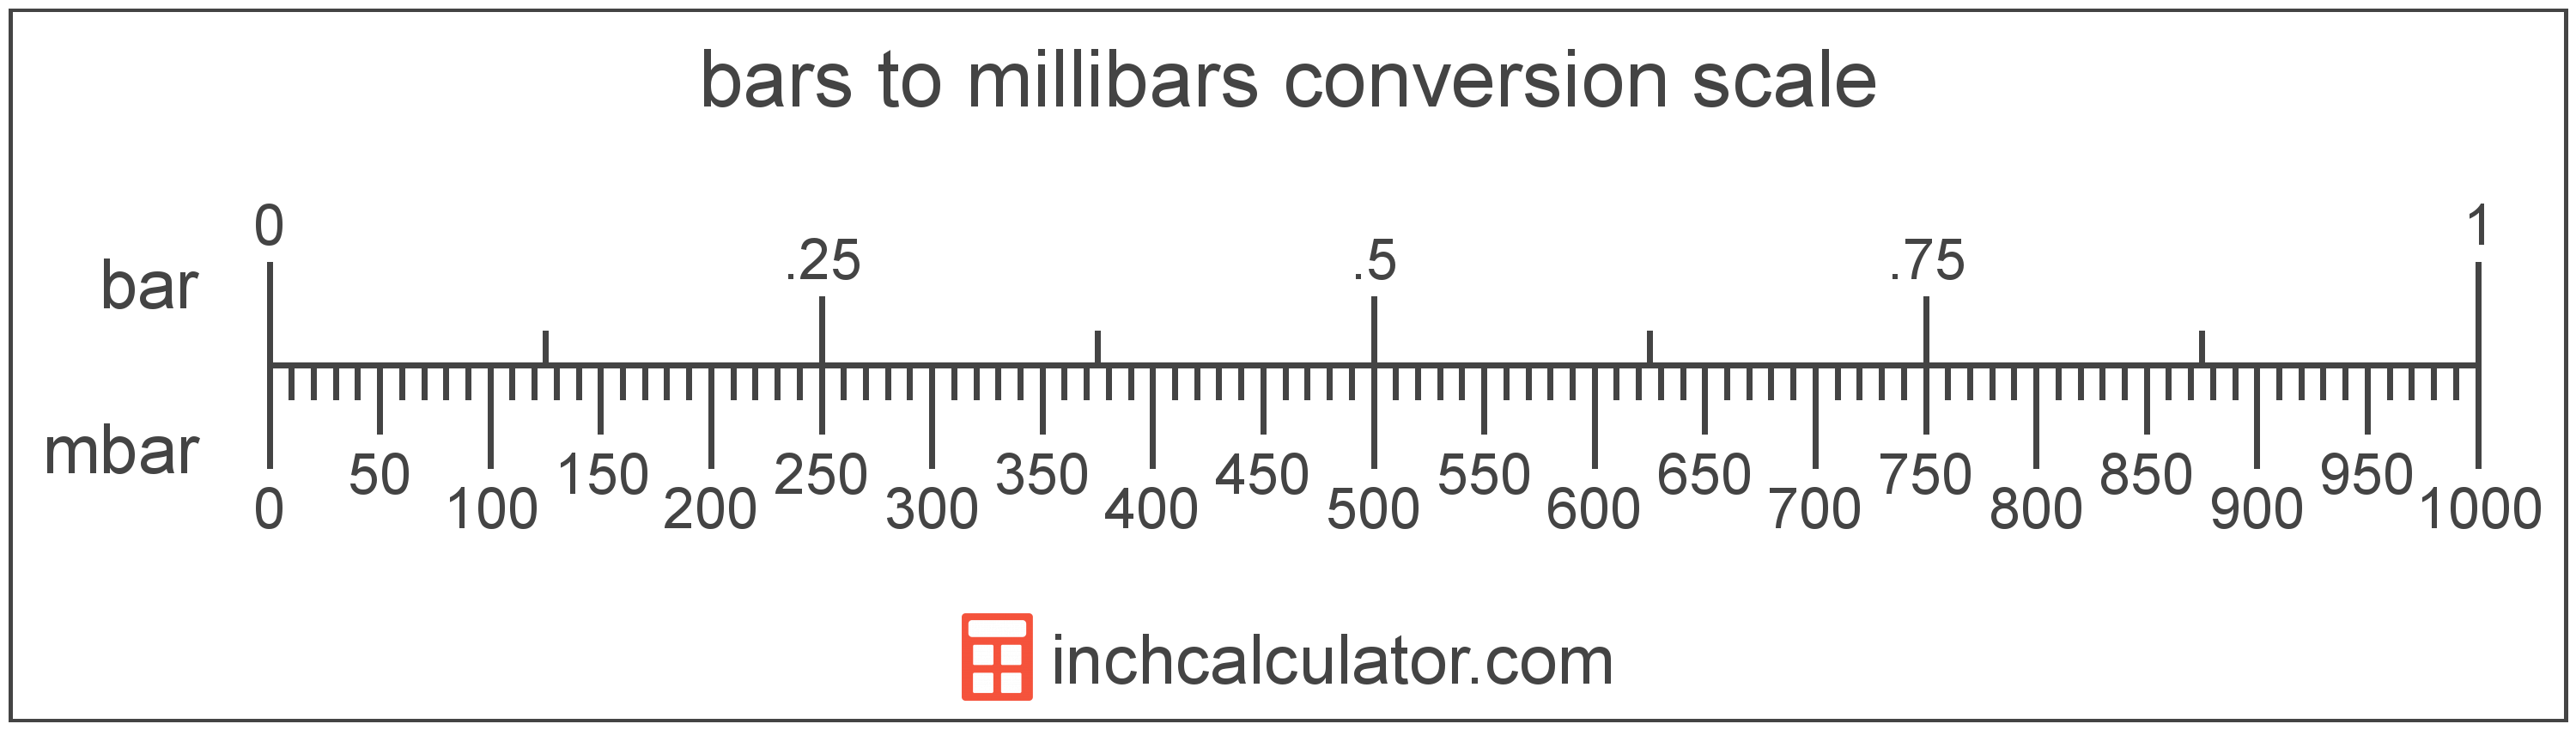 conversion scale showing bars and equivalent millibars pressure values